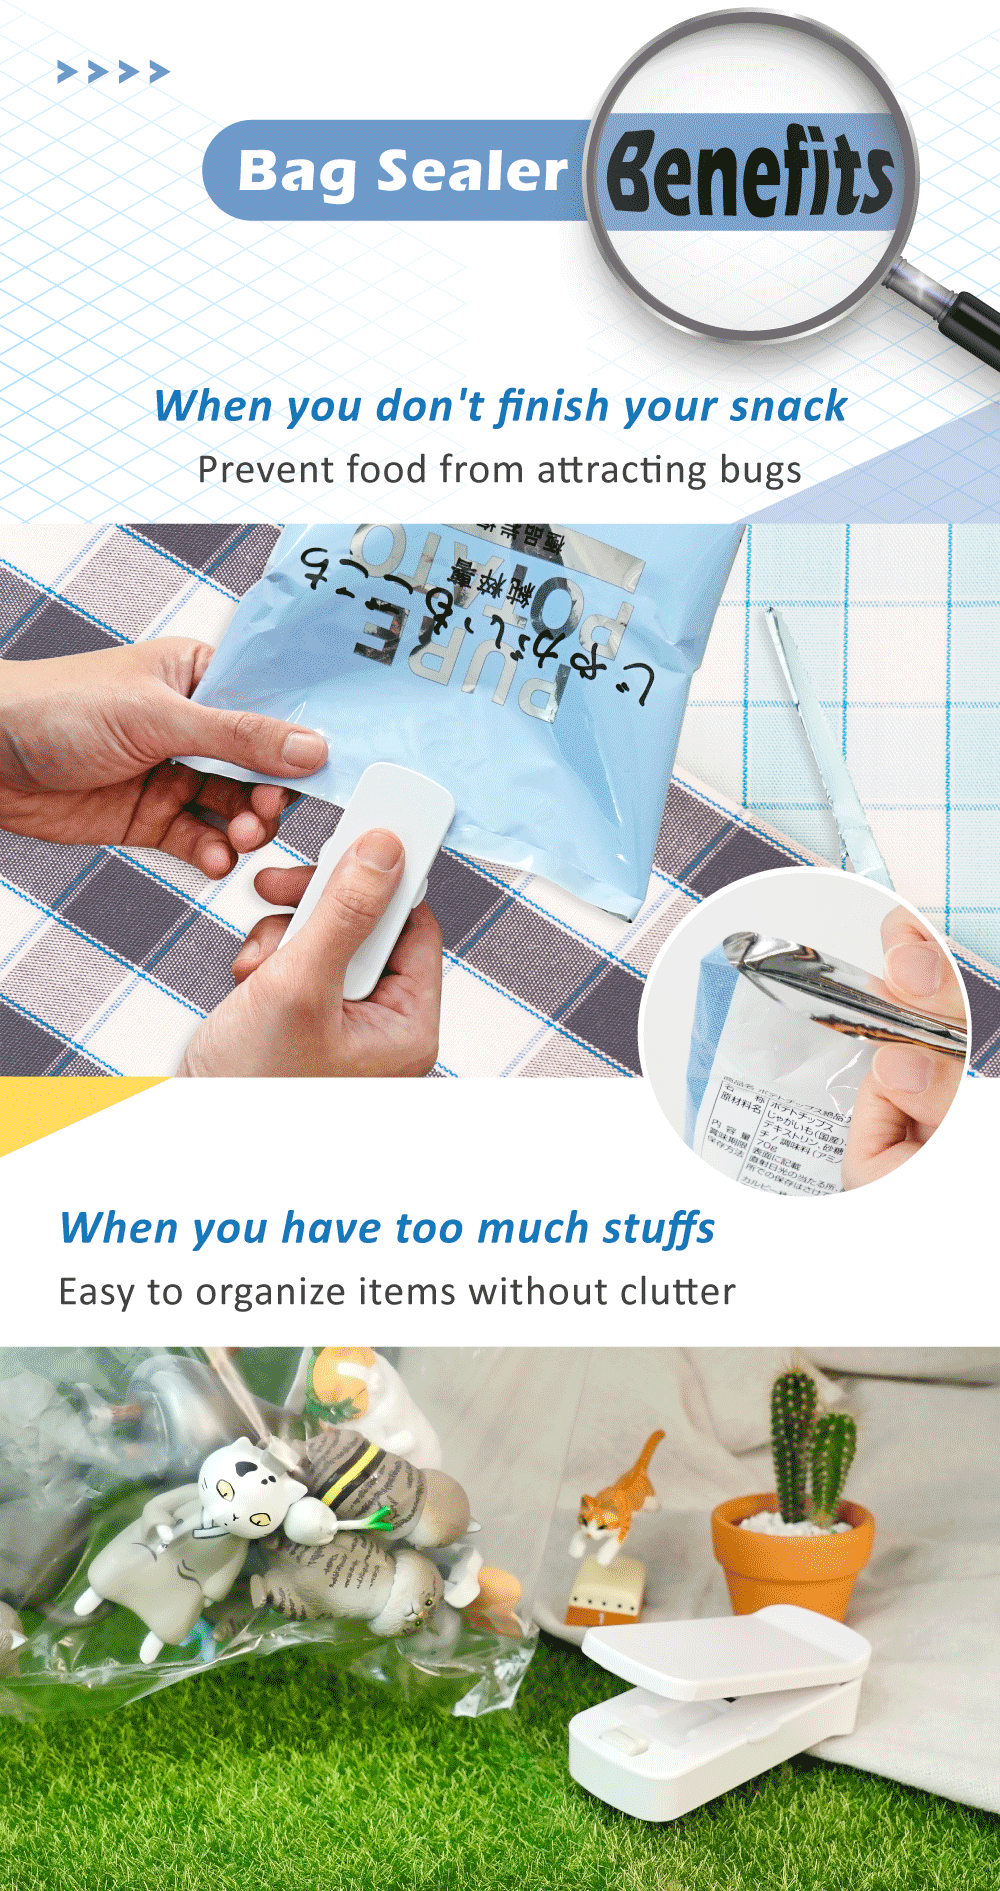 Picco Bag Sealer Benefits : prevent food from attracting bug, organize items without clutter